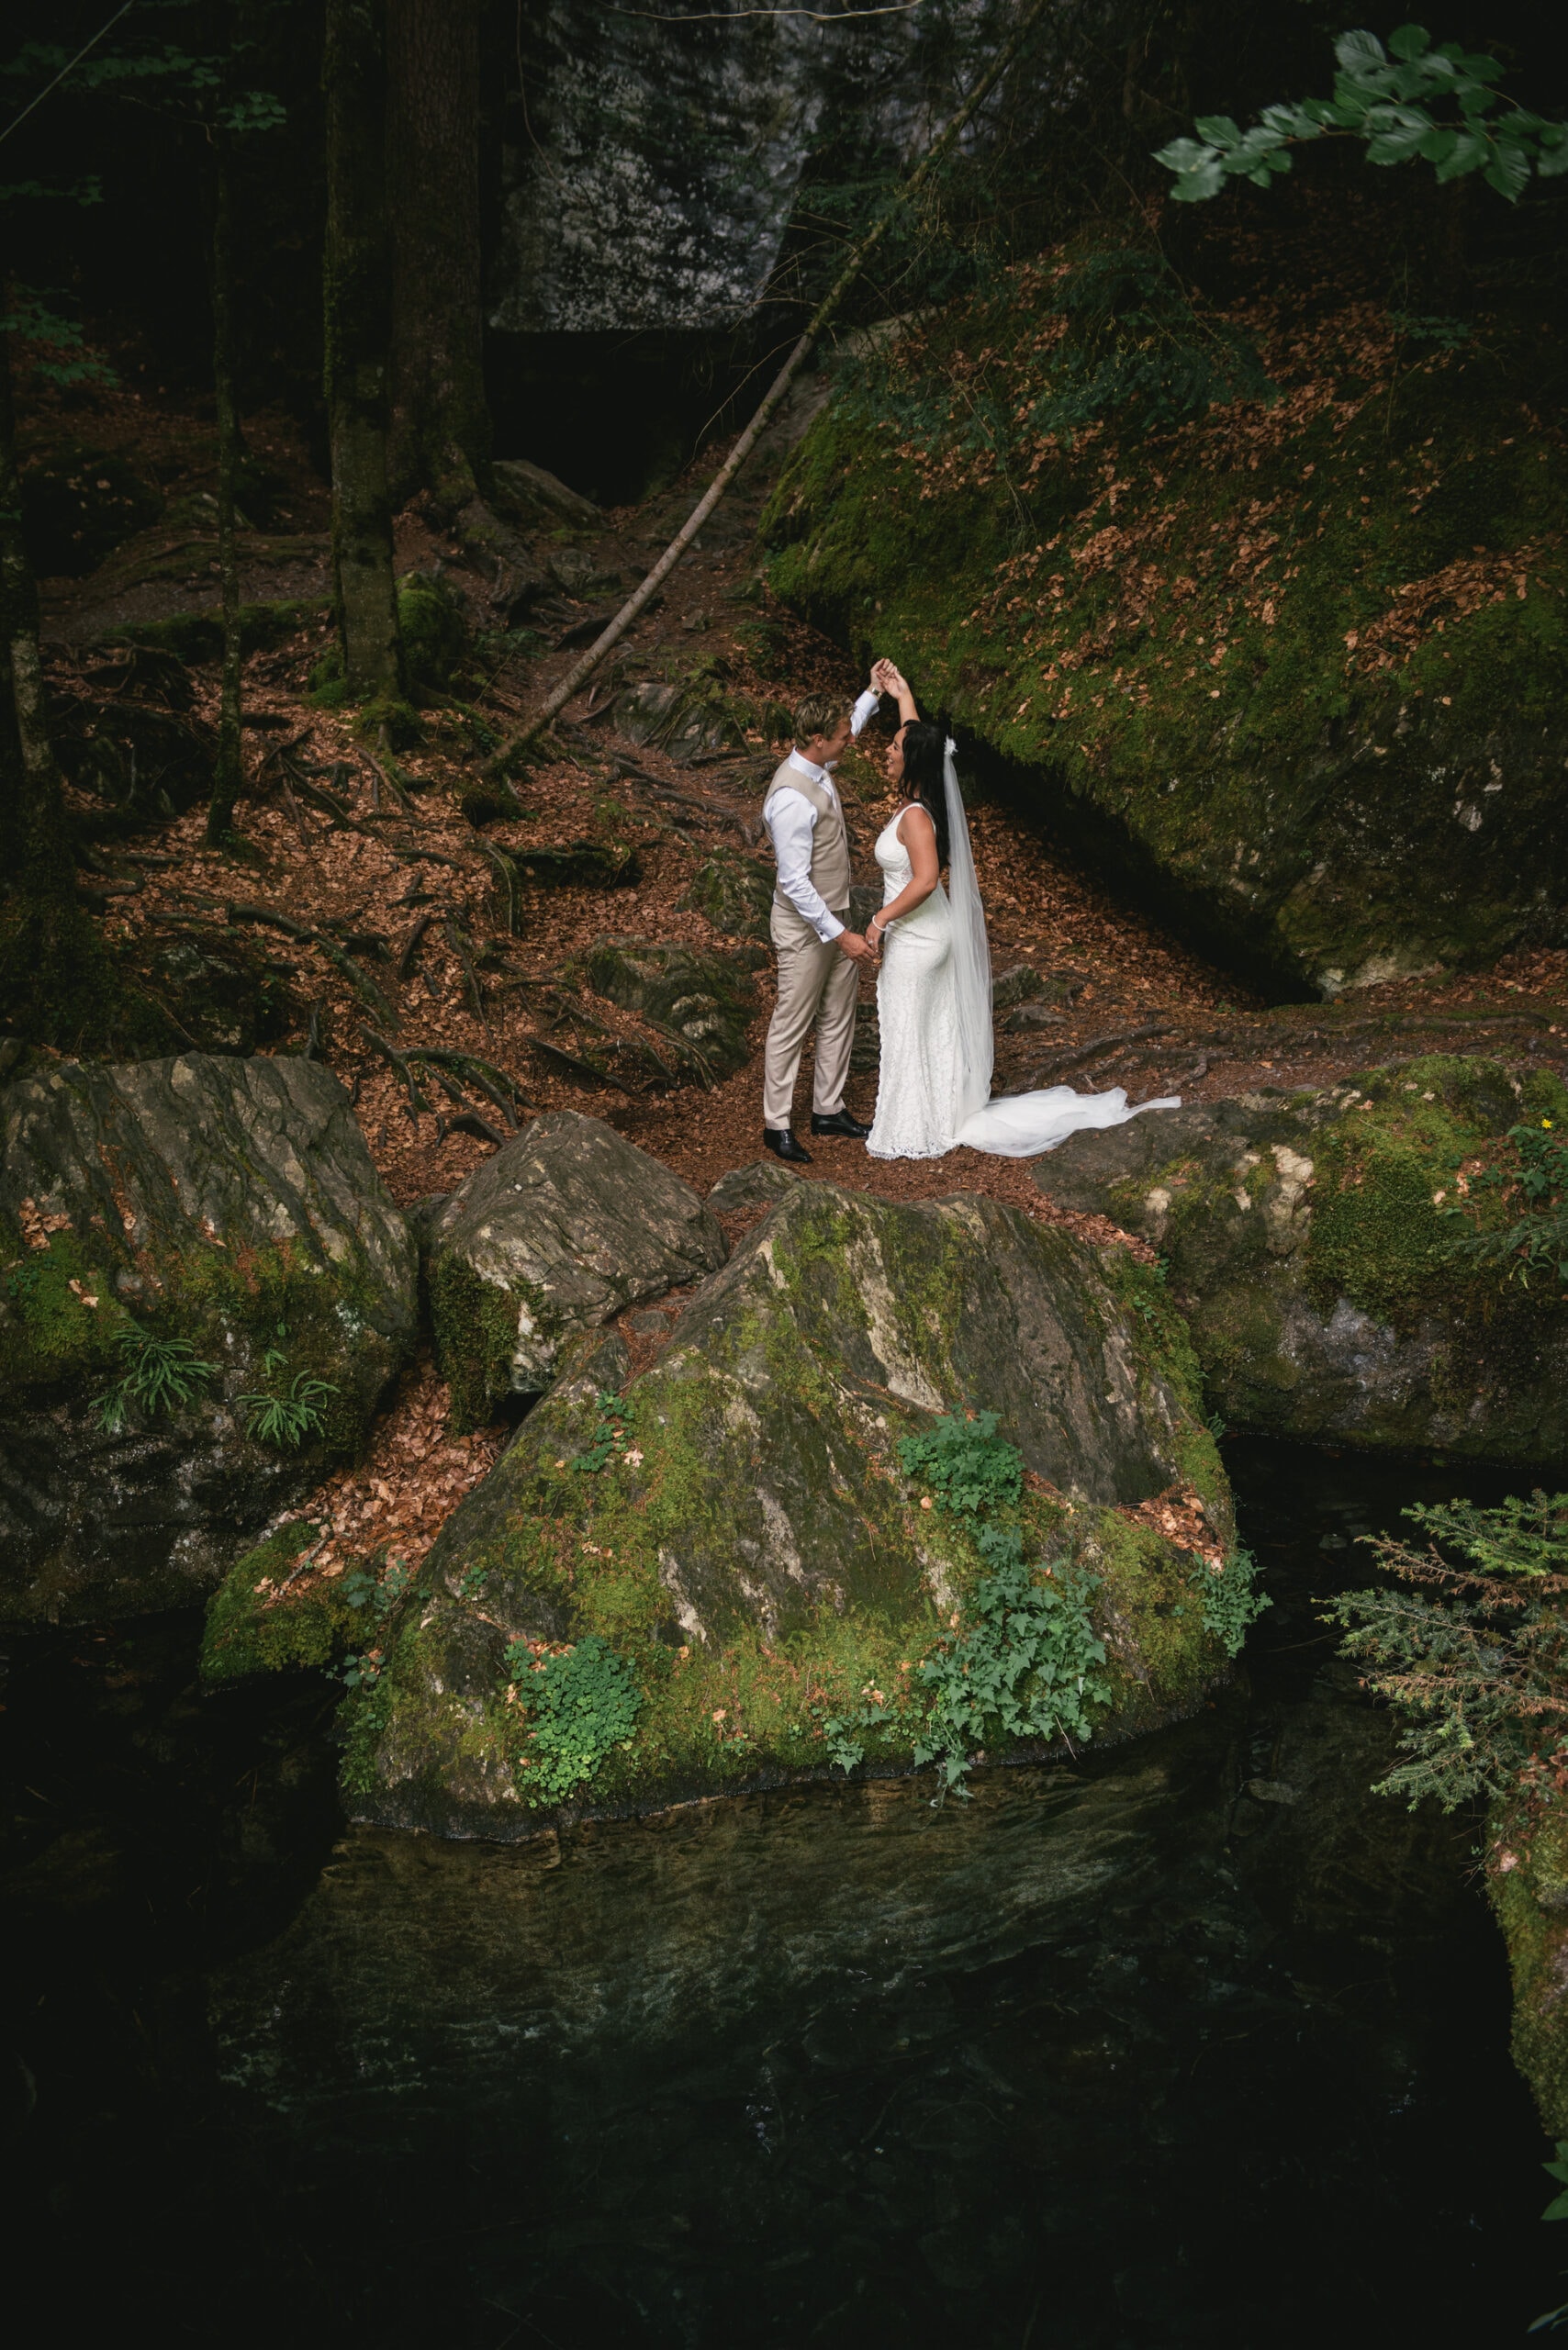 Vows whispered in nature's embrace - a heartfelt hiking elopement.